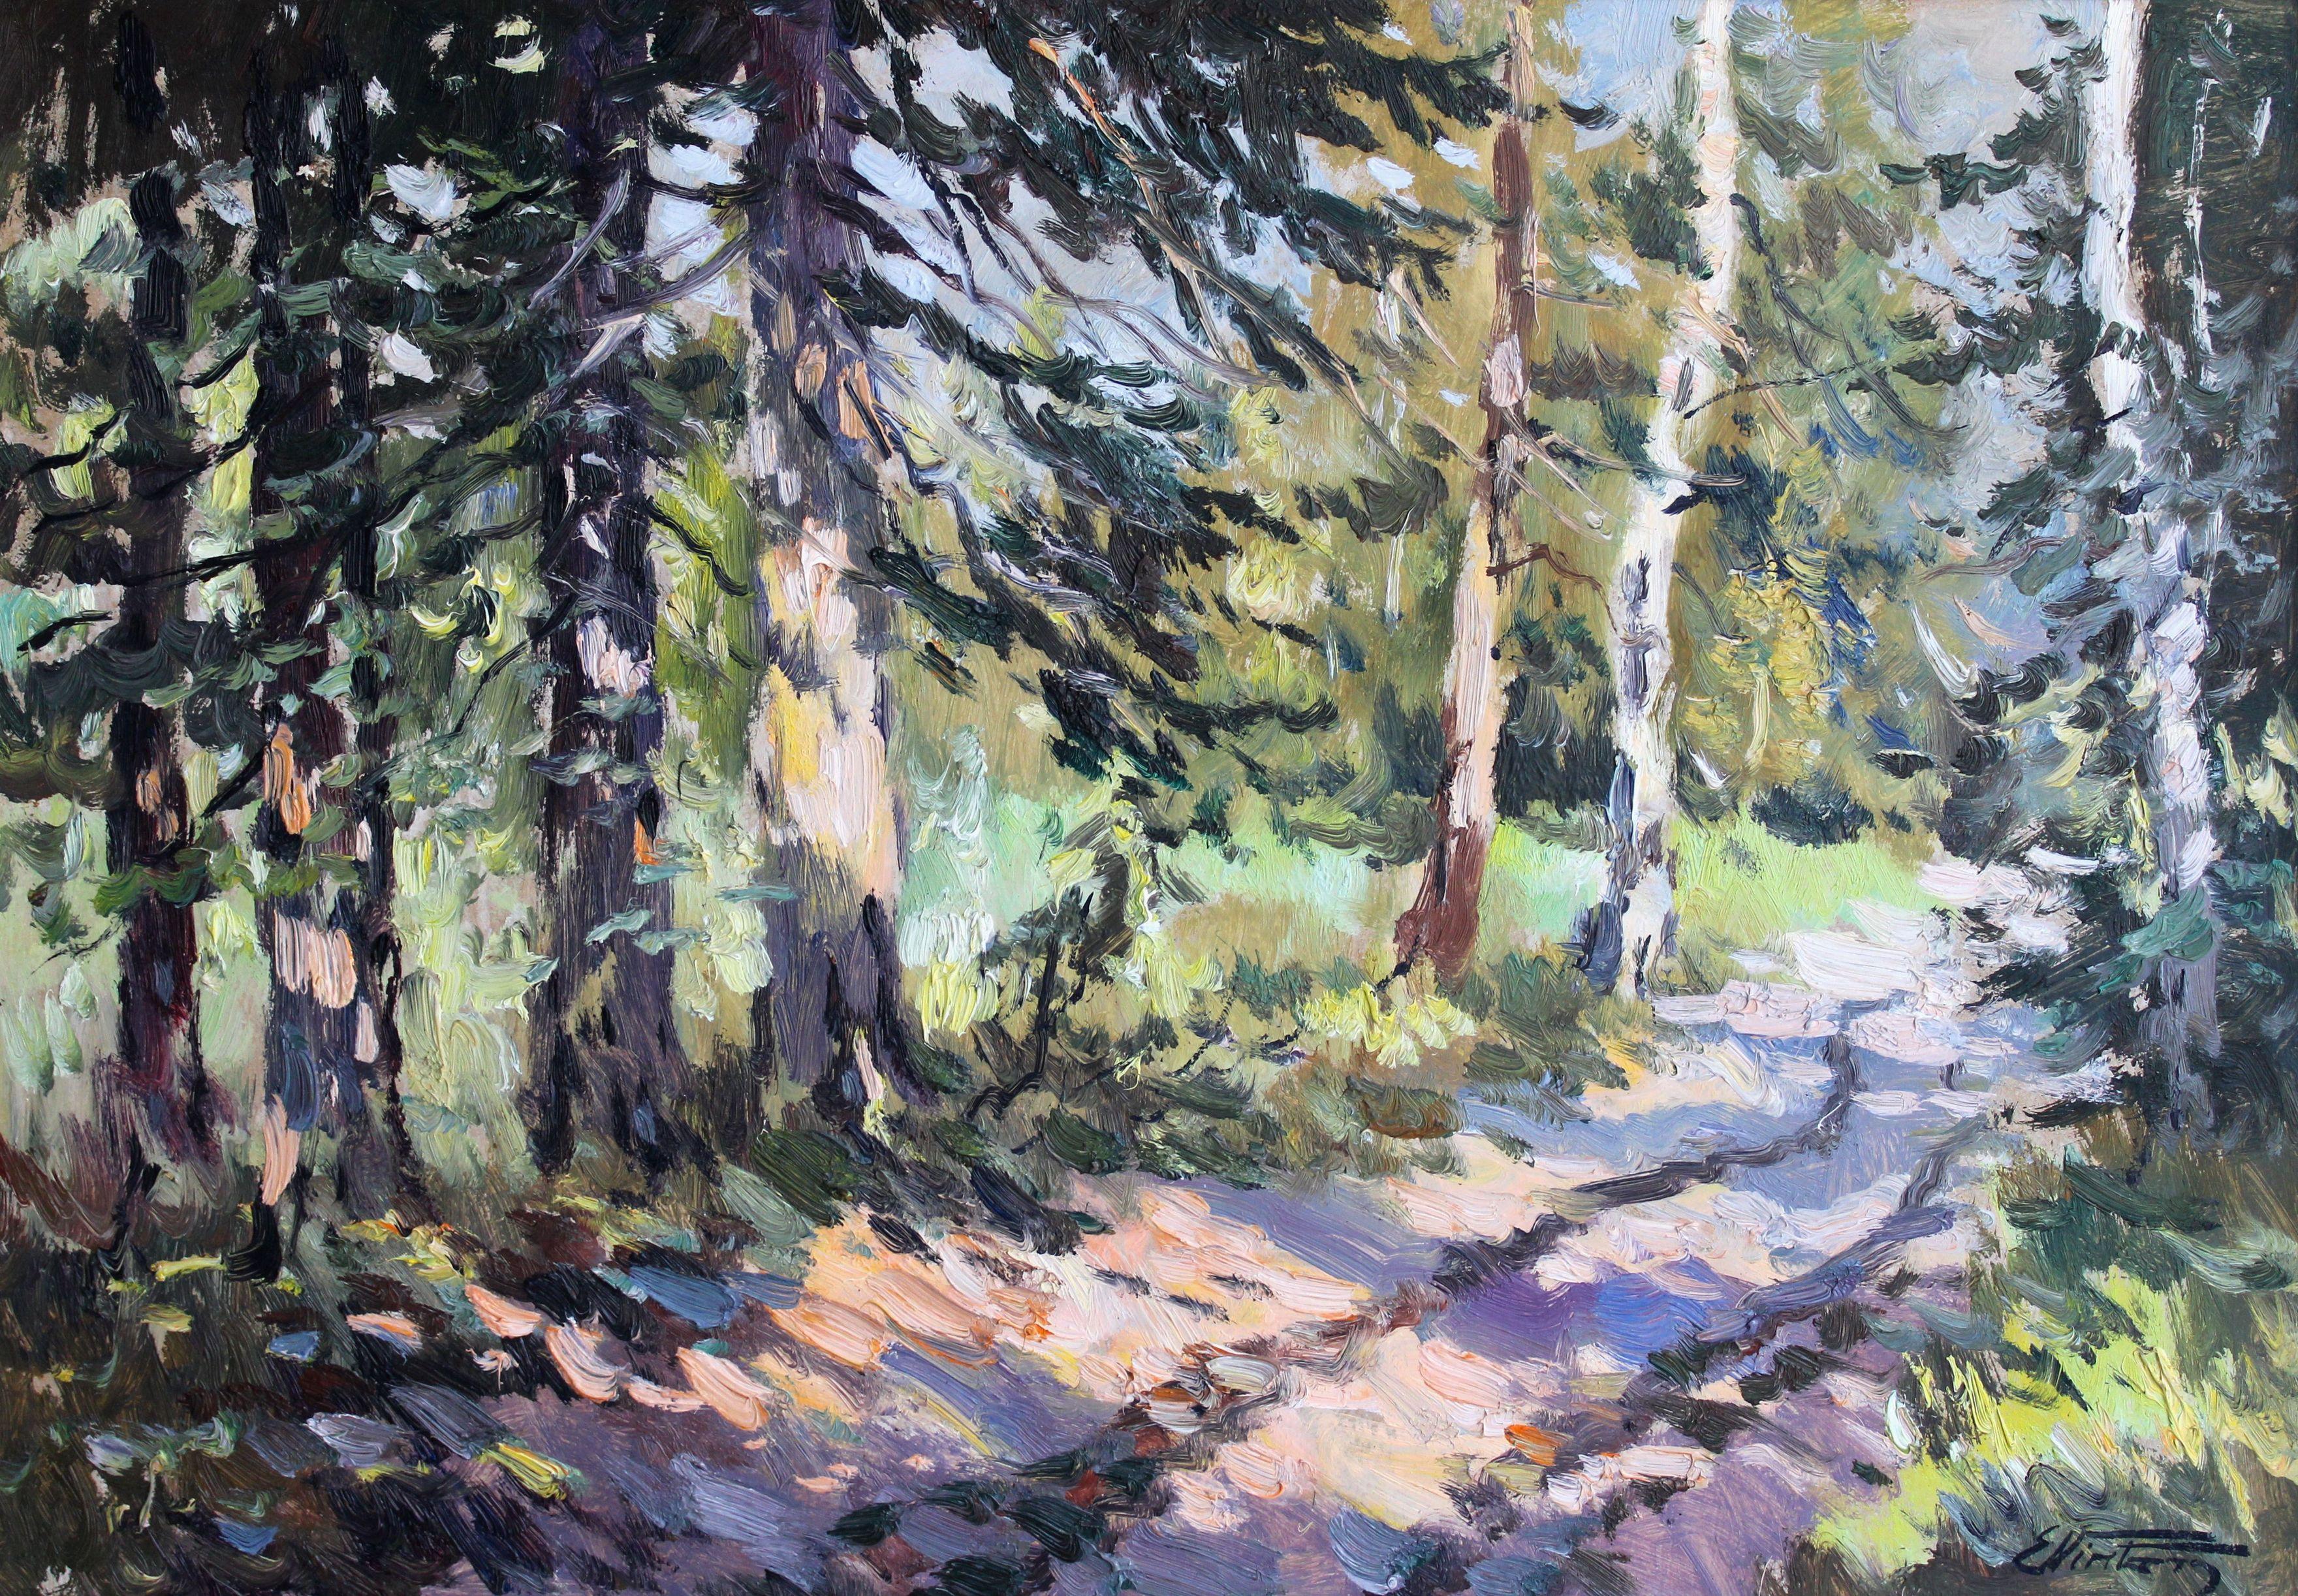 In a sunny forest. Cardboard, oil, 46x66 cm - Painting by Edgars Vinters